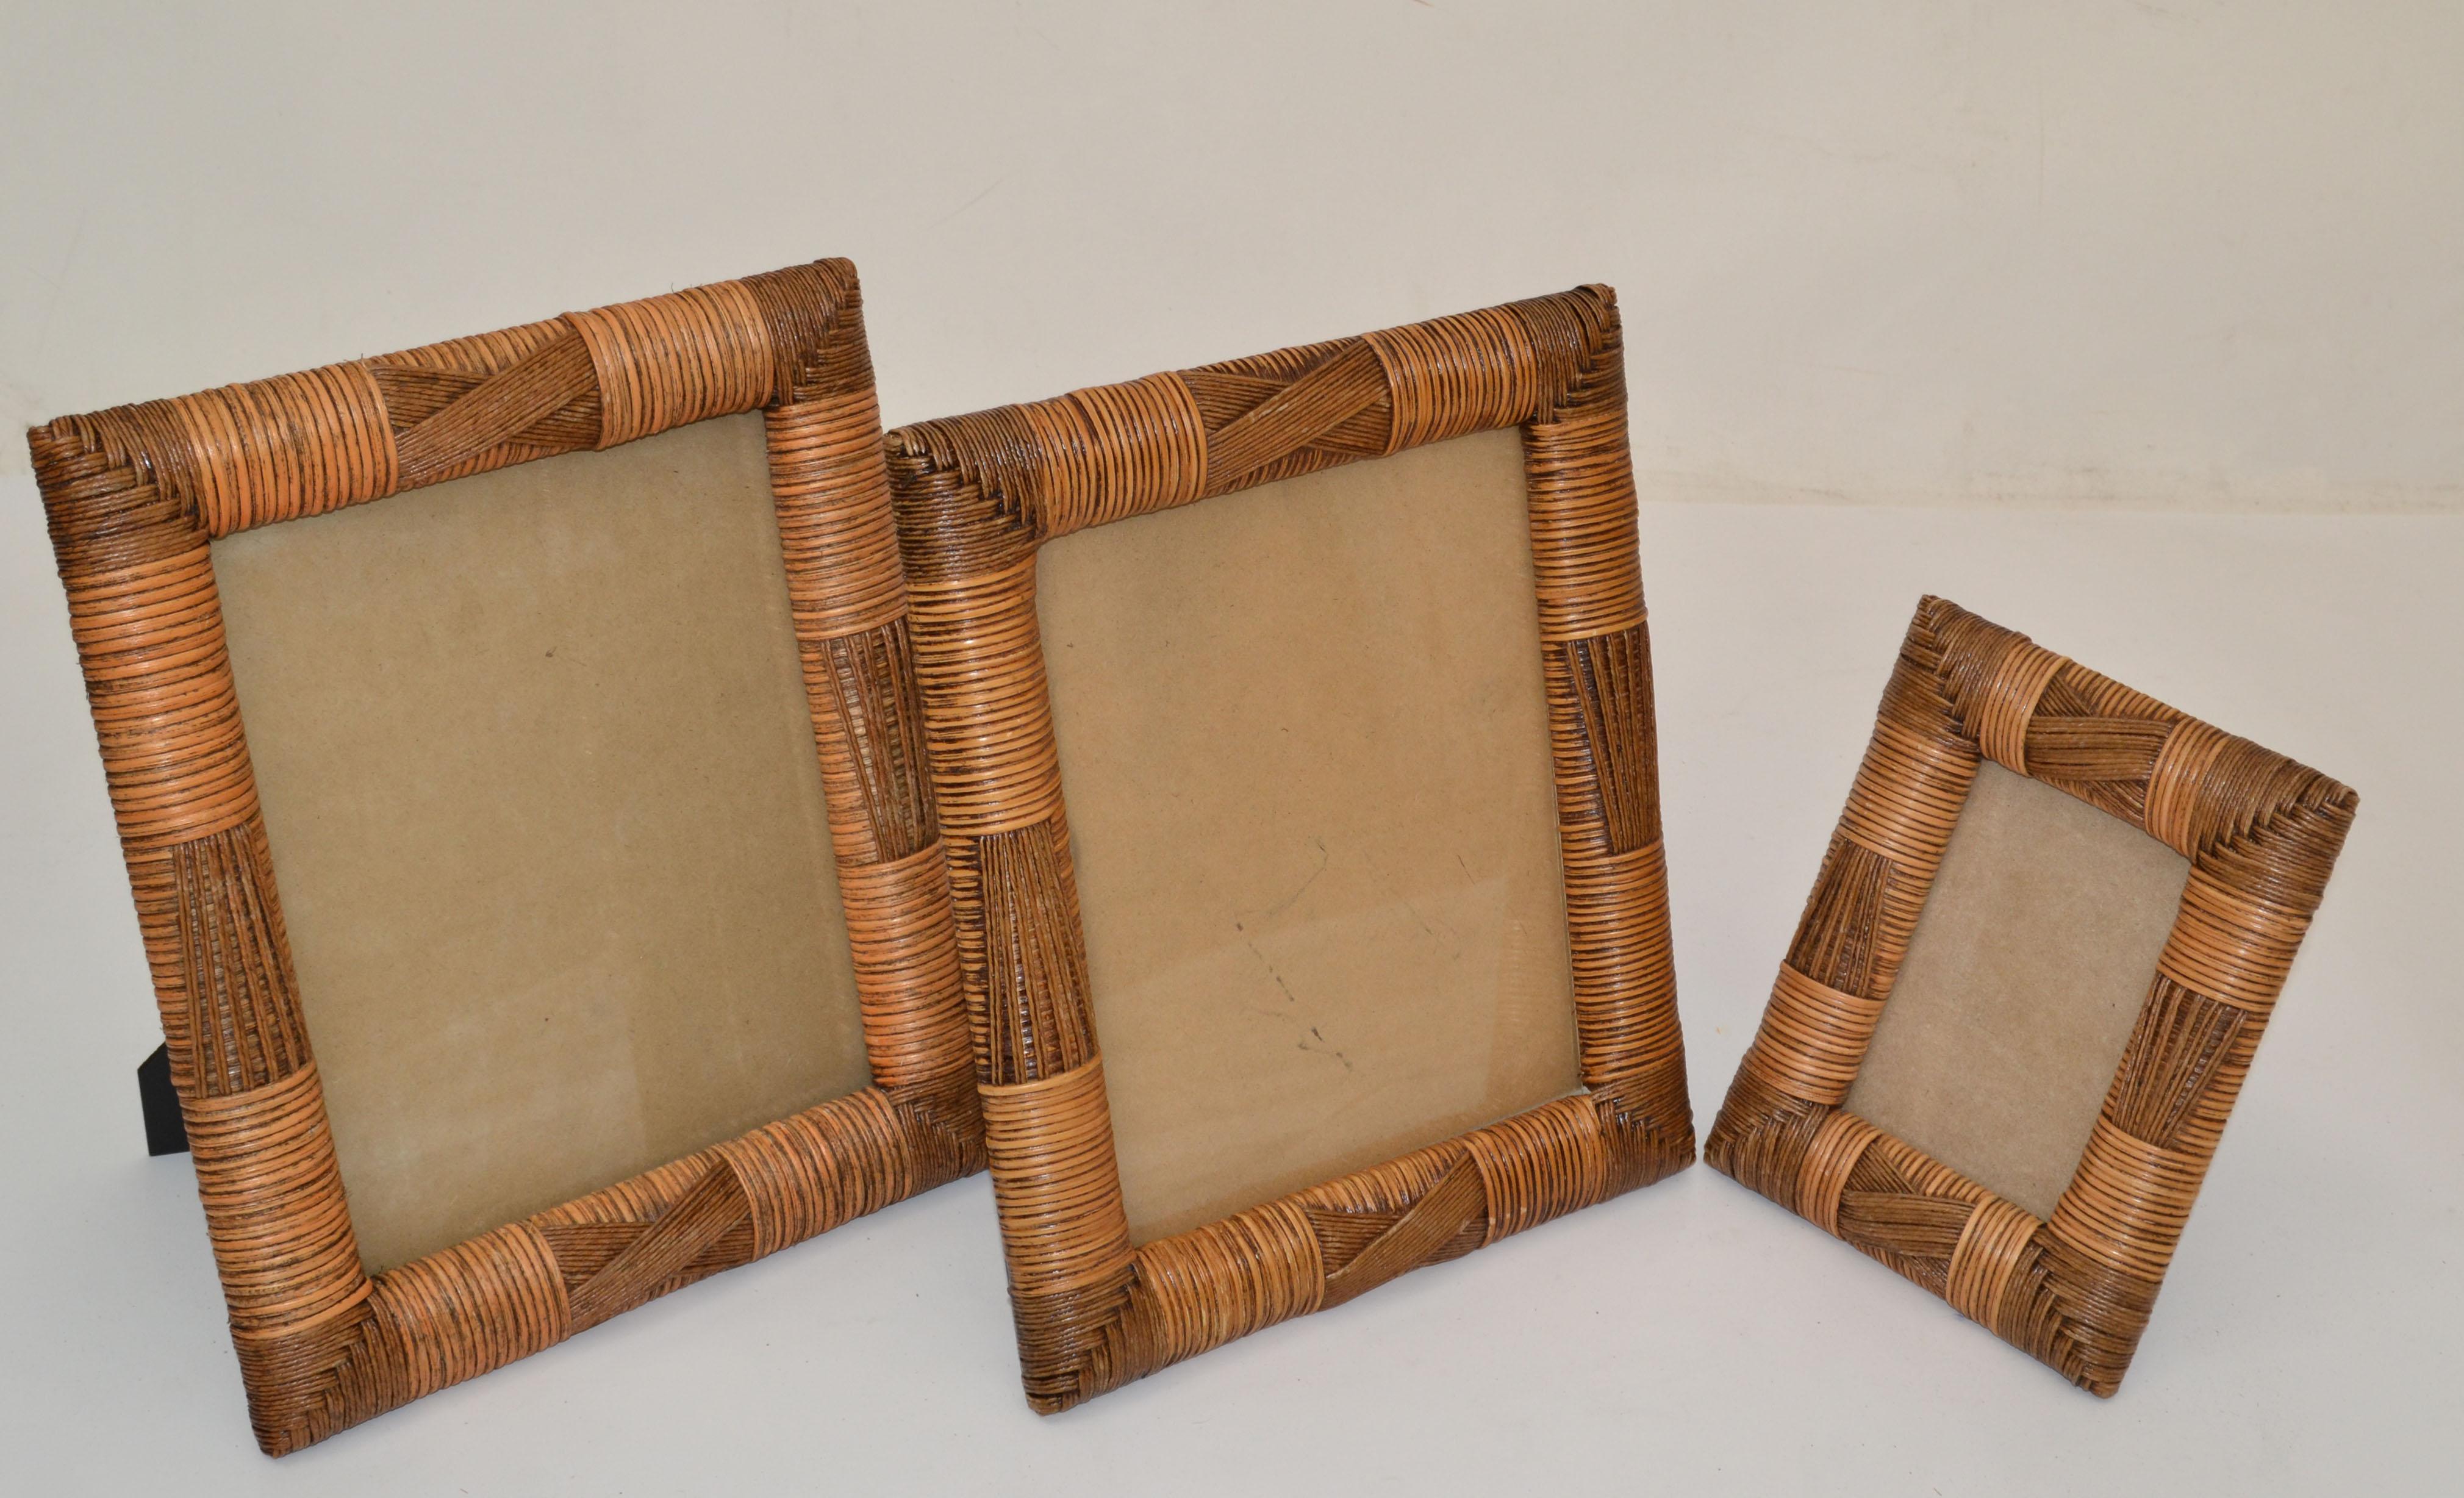 Set of 3 Cane, Wicker & Bamboo Picture Frames Bohemian Chic Mid-Century Modern For Sale 1